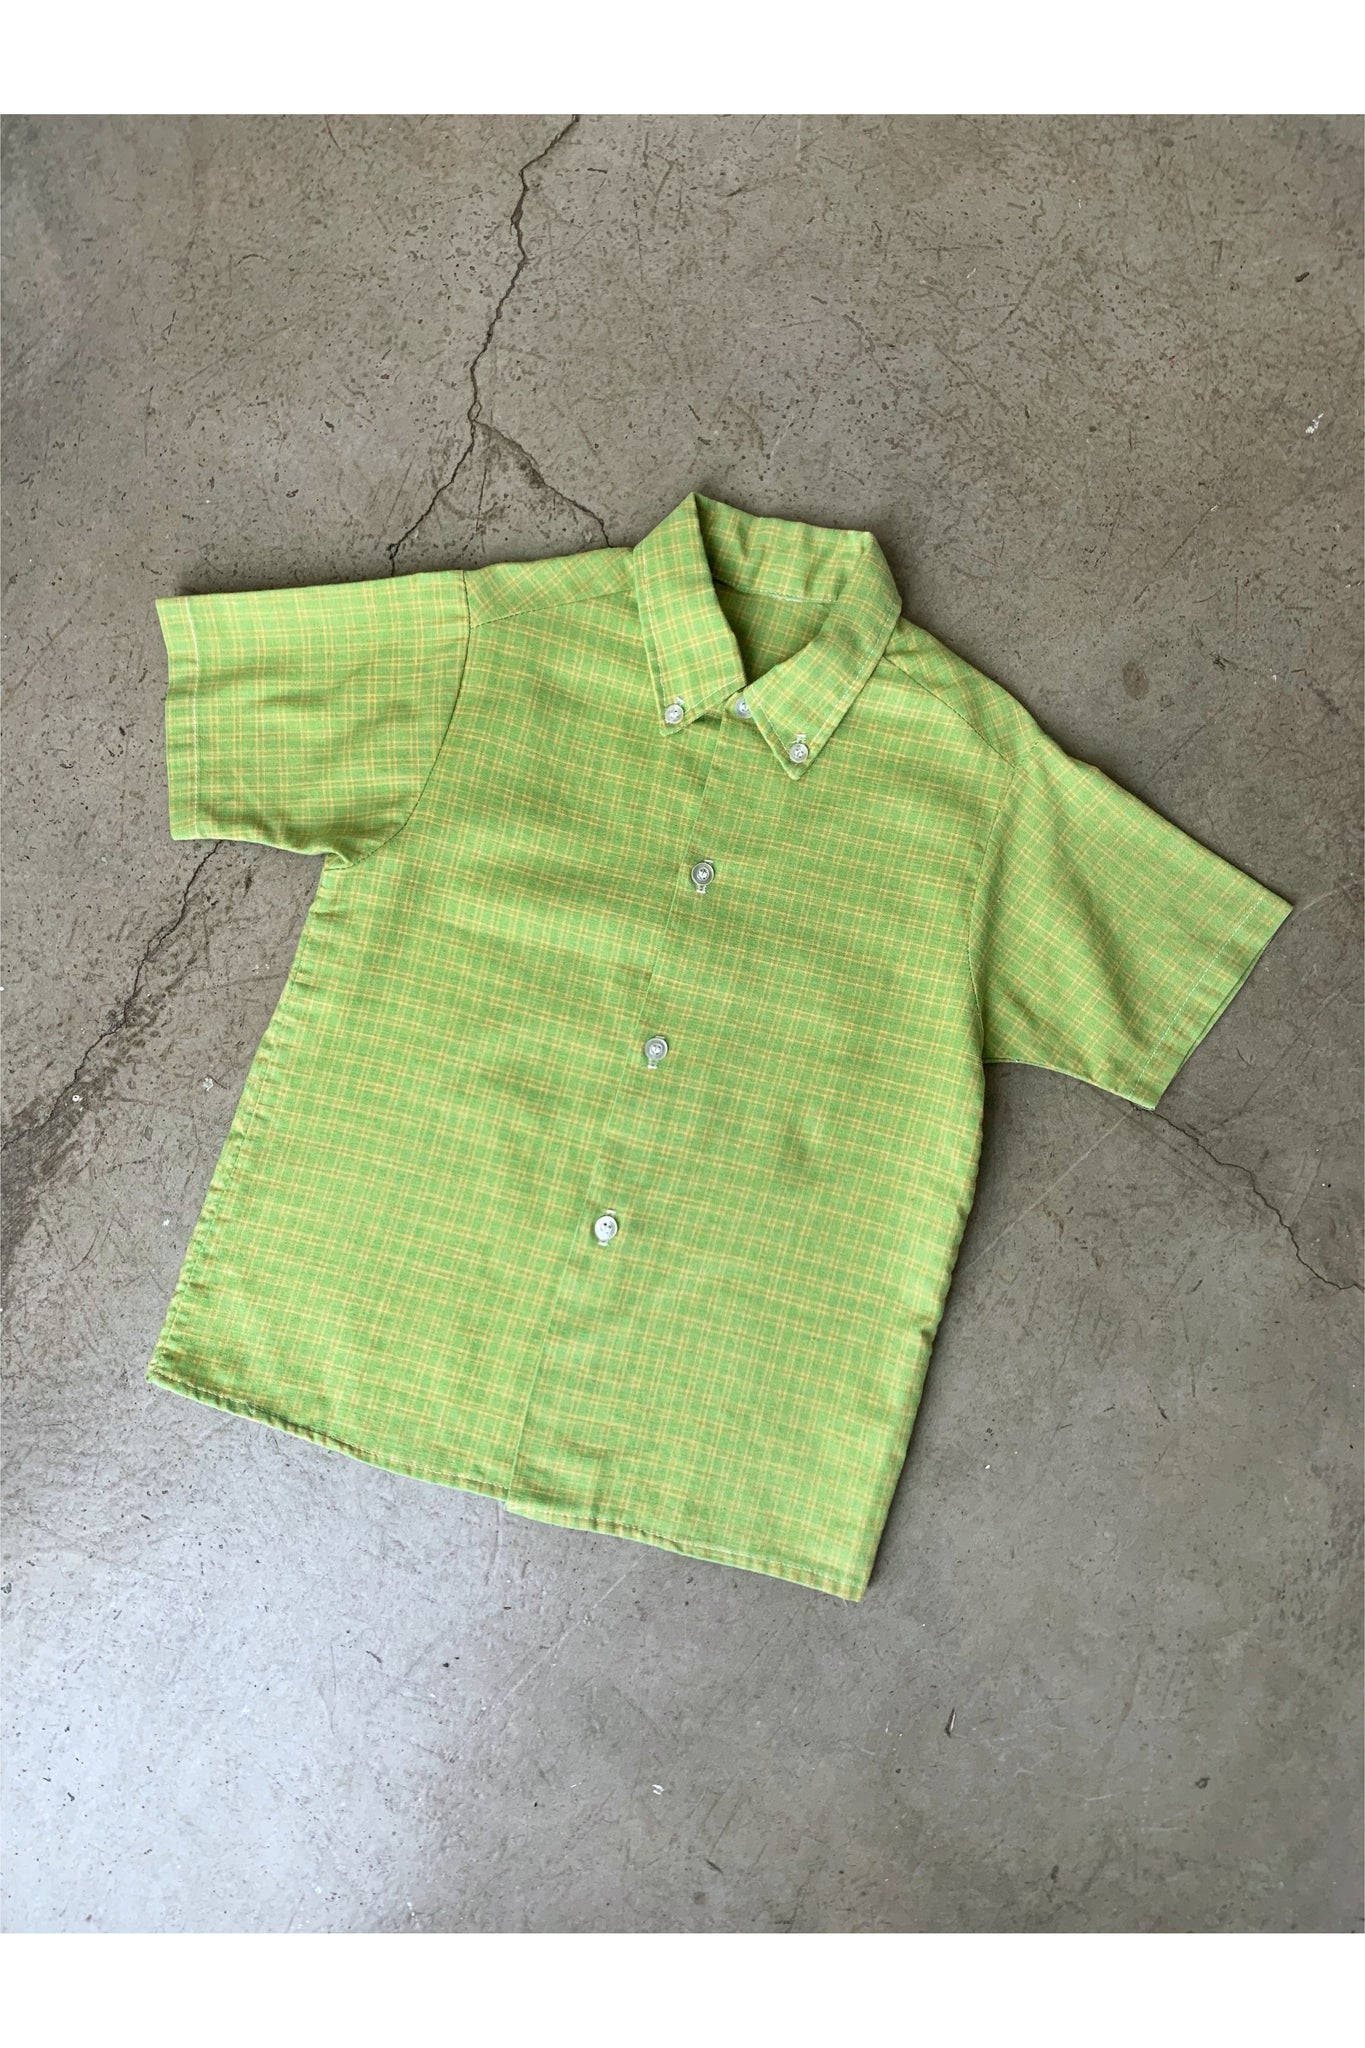 Vintage 70’s Pea Green Grid Print Button Up - Approx Size 6 or 7